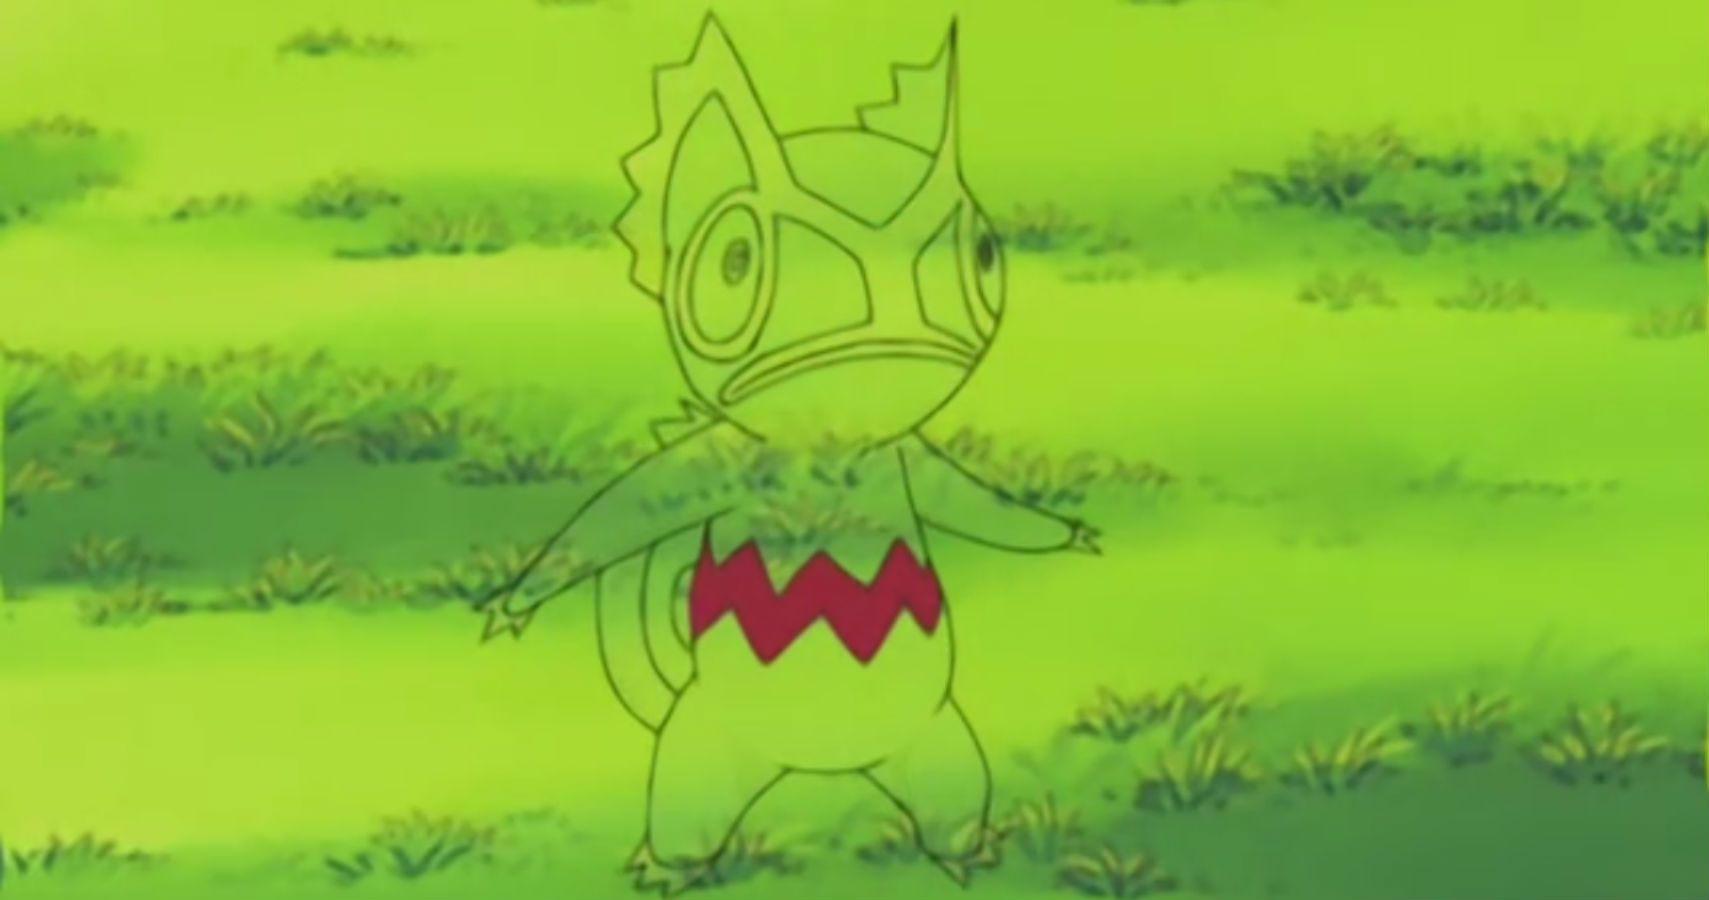 Kecleon going invisible in the Pokemon anime